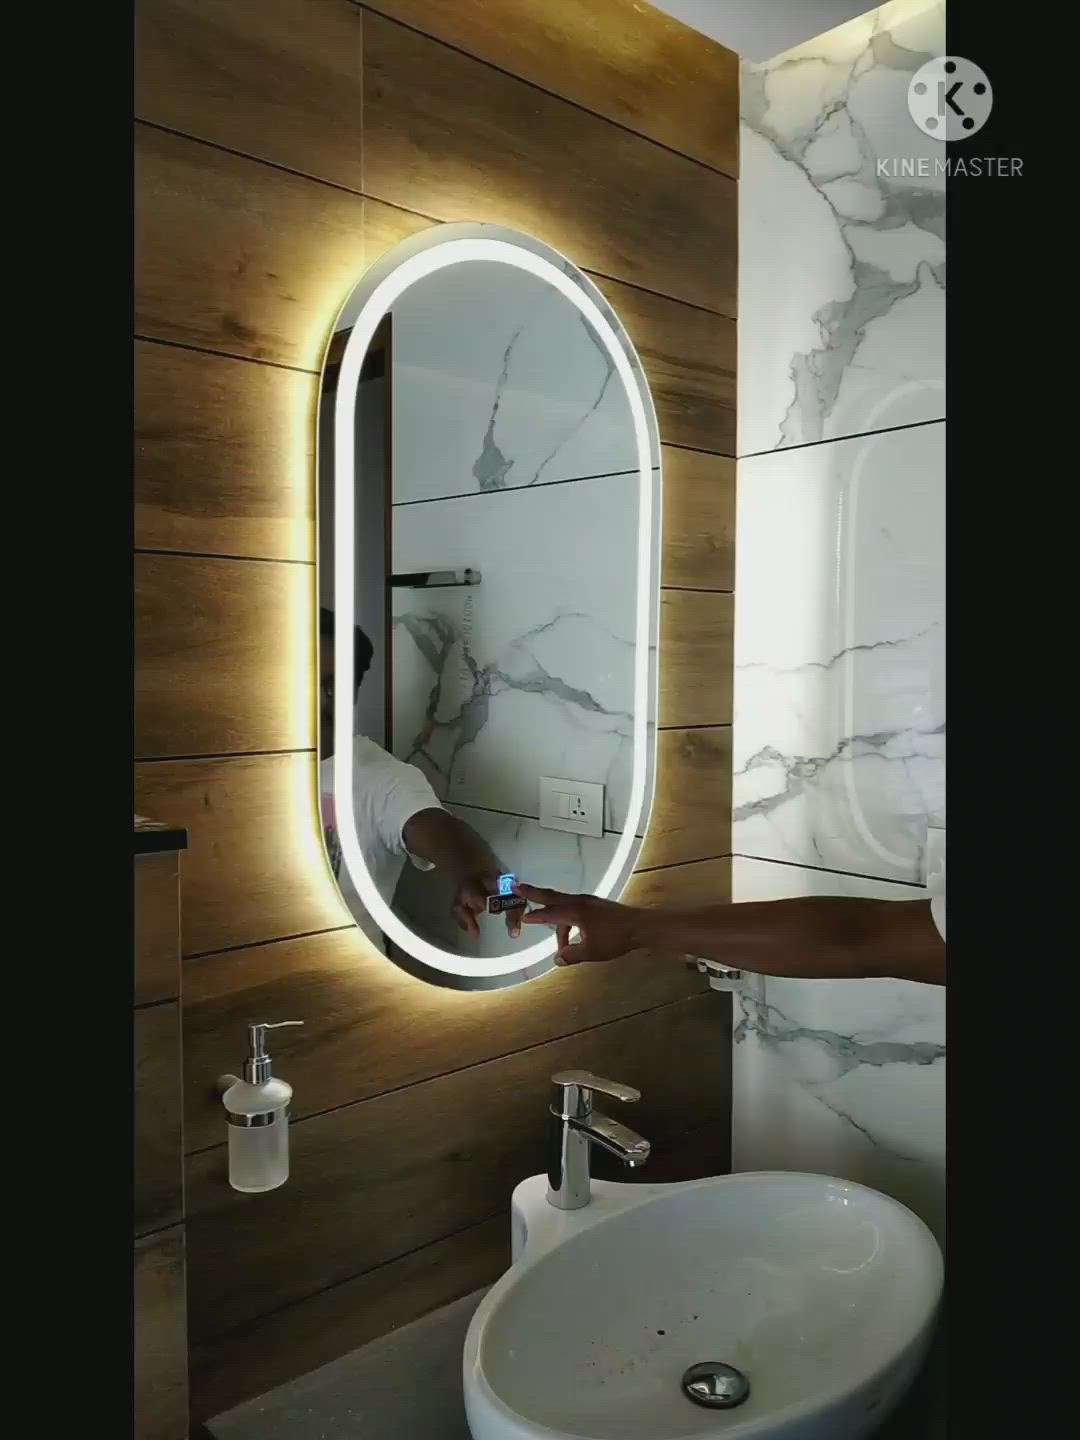 led mirror with touch sensor switch 
in and out light 9.7.4.4.4.5.6.9.3.3.9